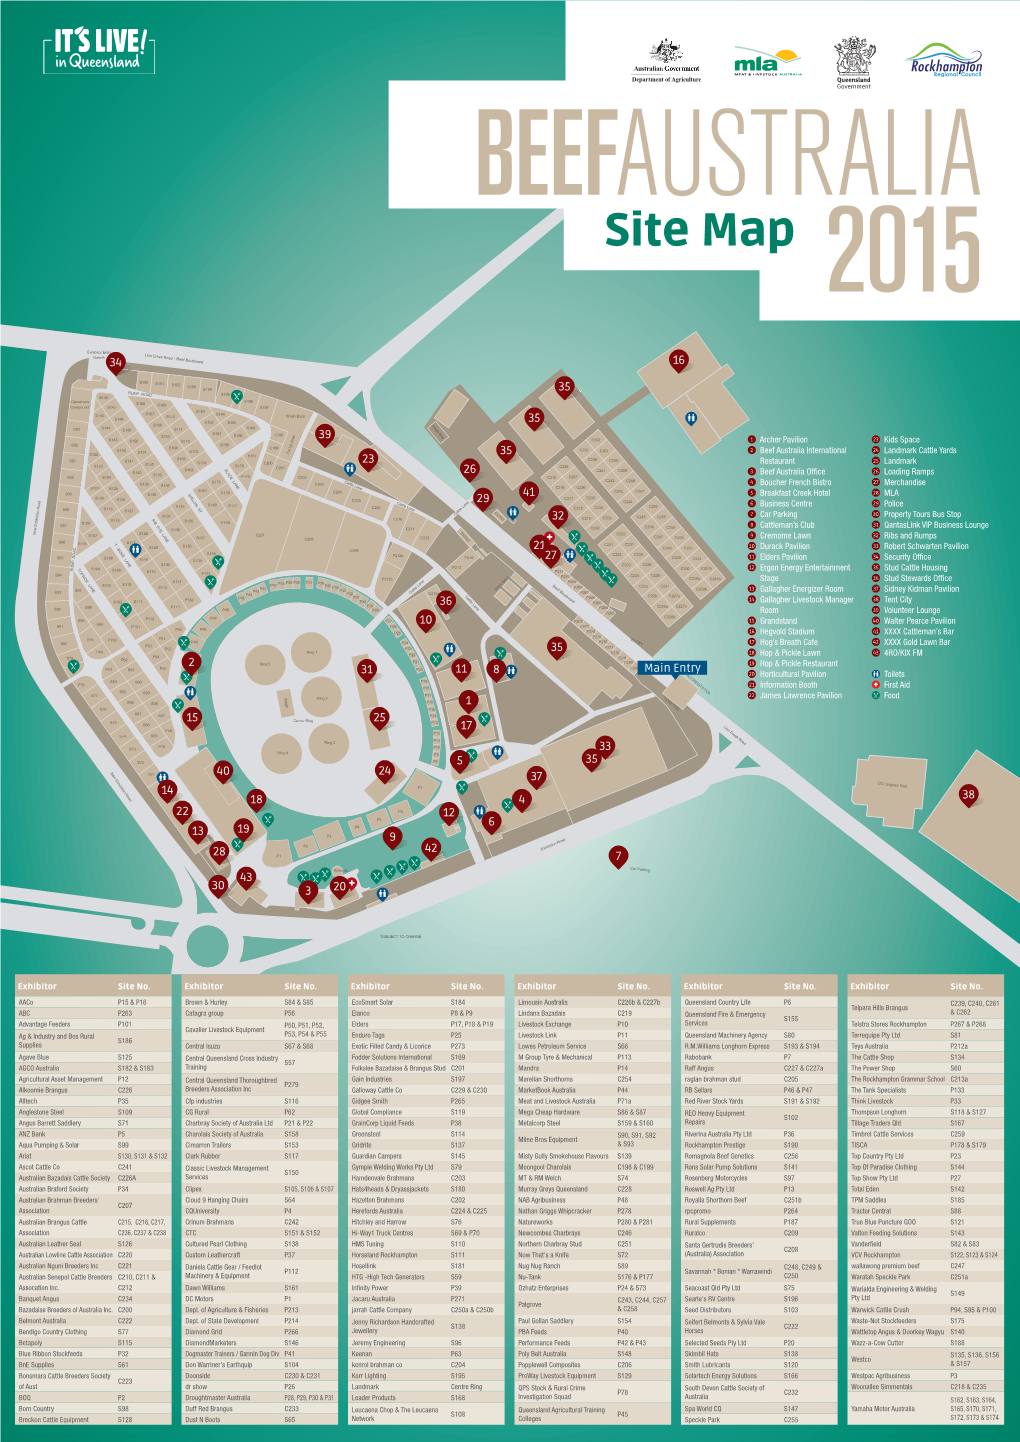 Site Map 2015